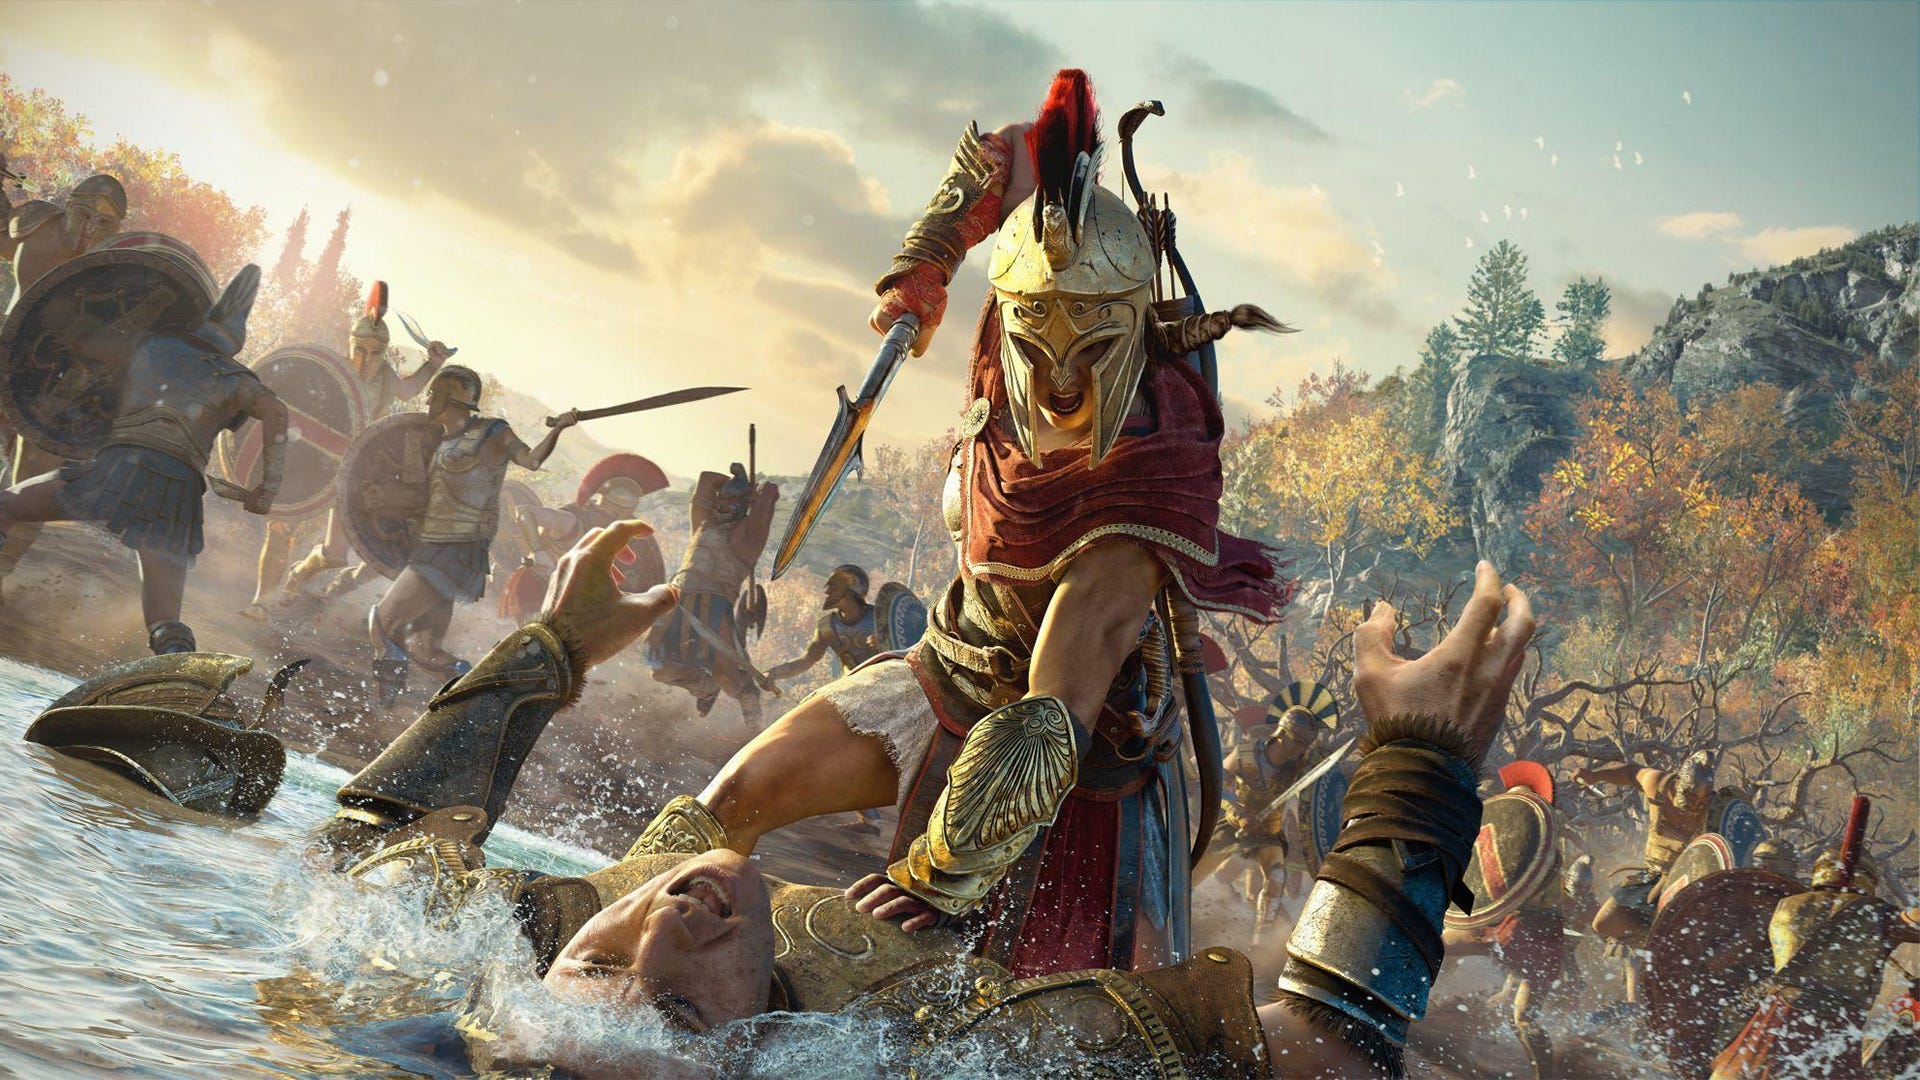 Elevator smear pregnant My big fat Greek adventuring: Assassin's Creed Odyssey review | Technobubble